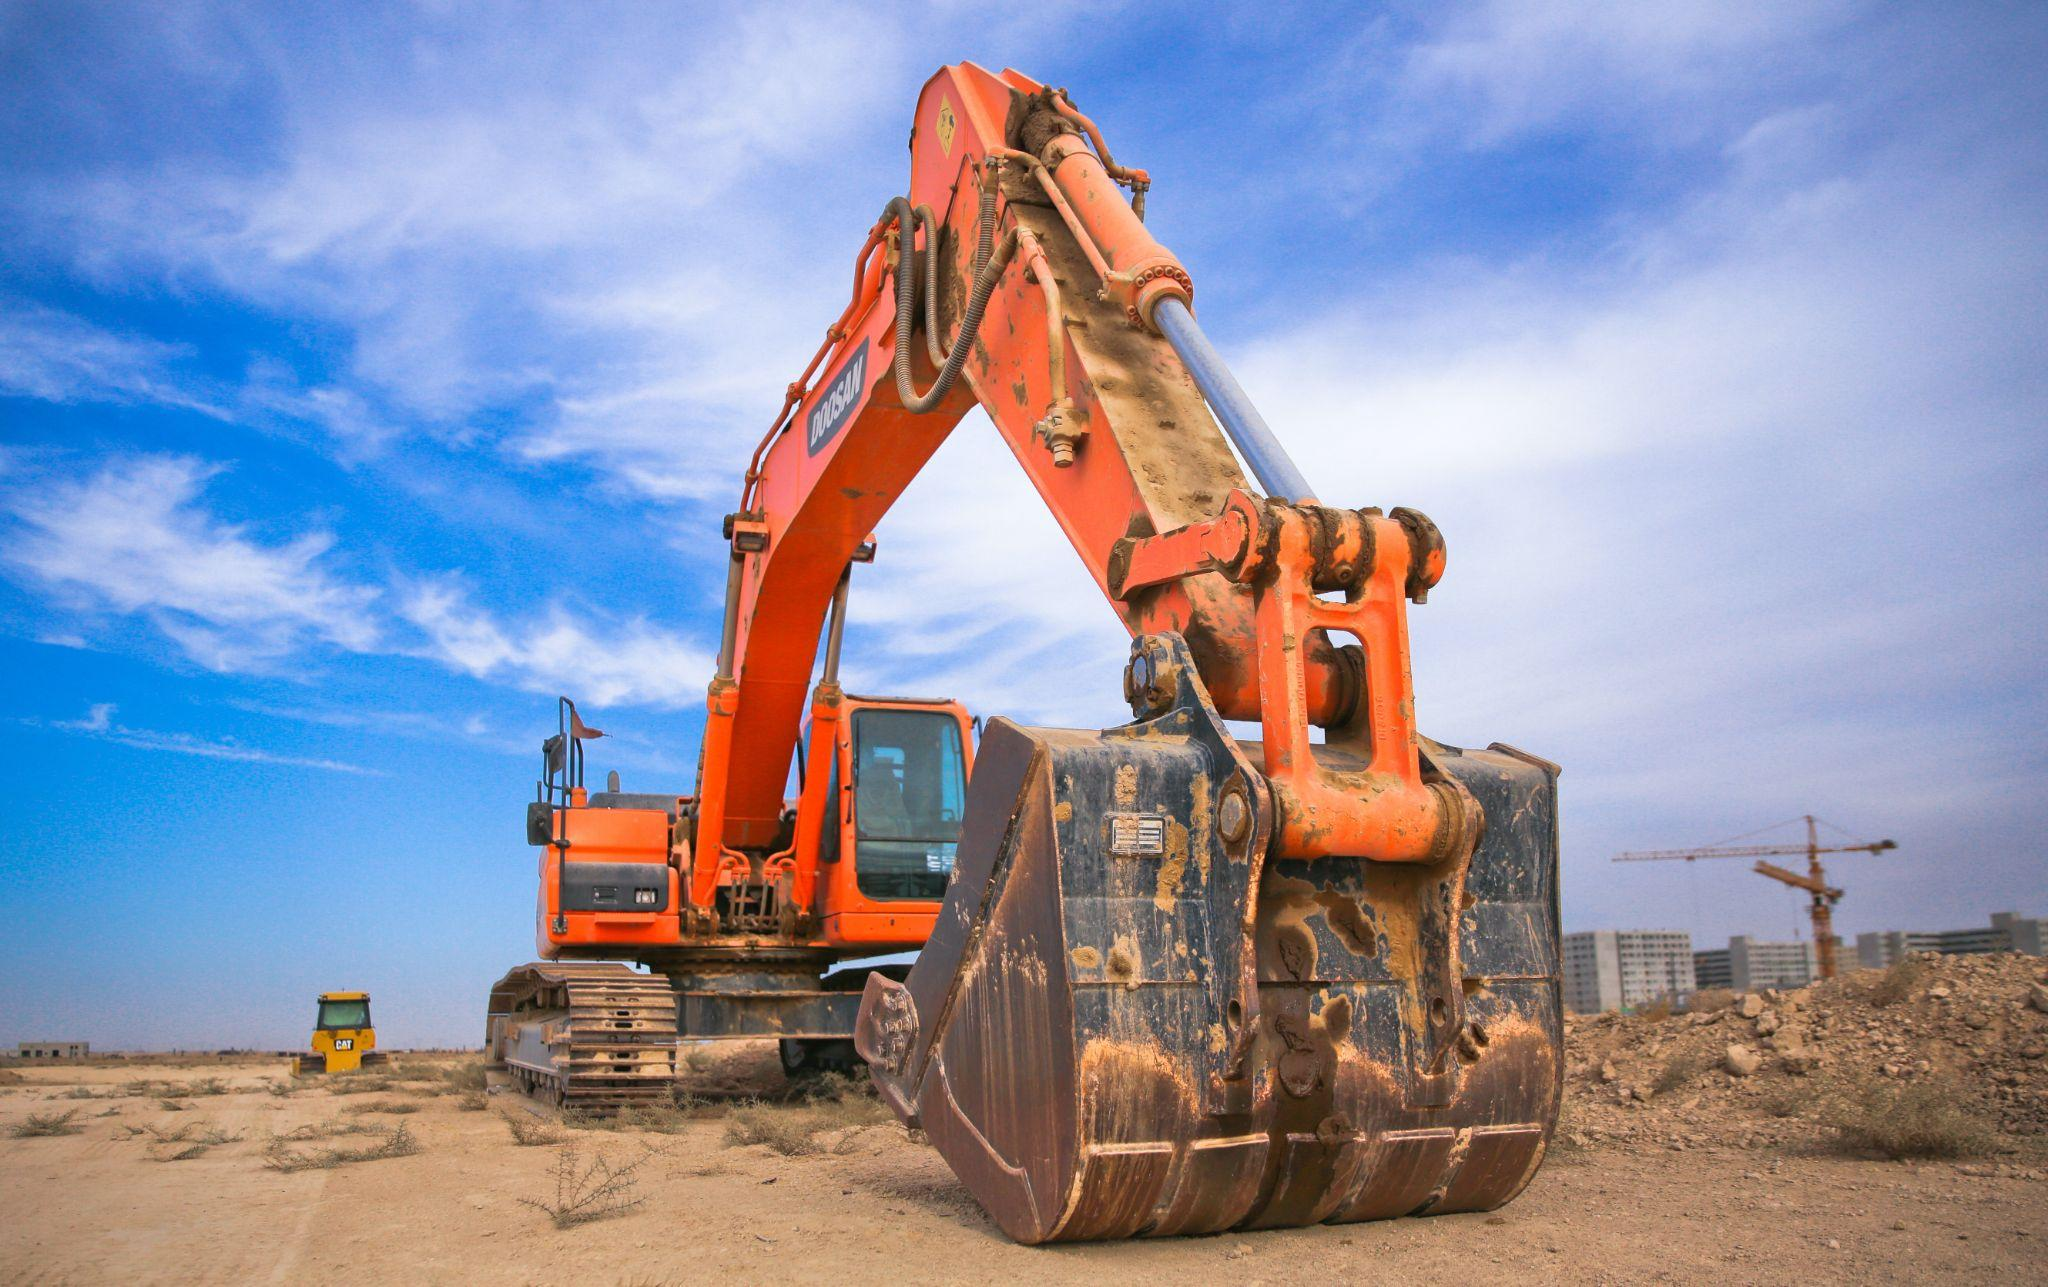 Construction Machinery and Equipment for Your Next Project